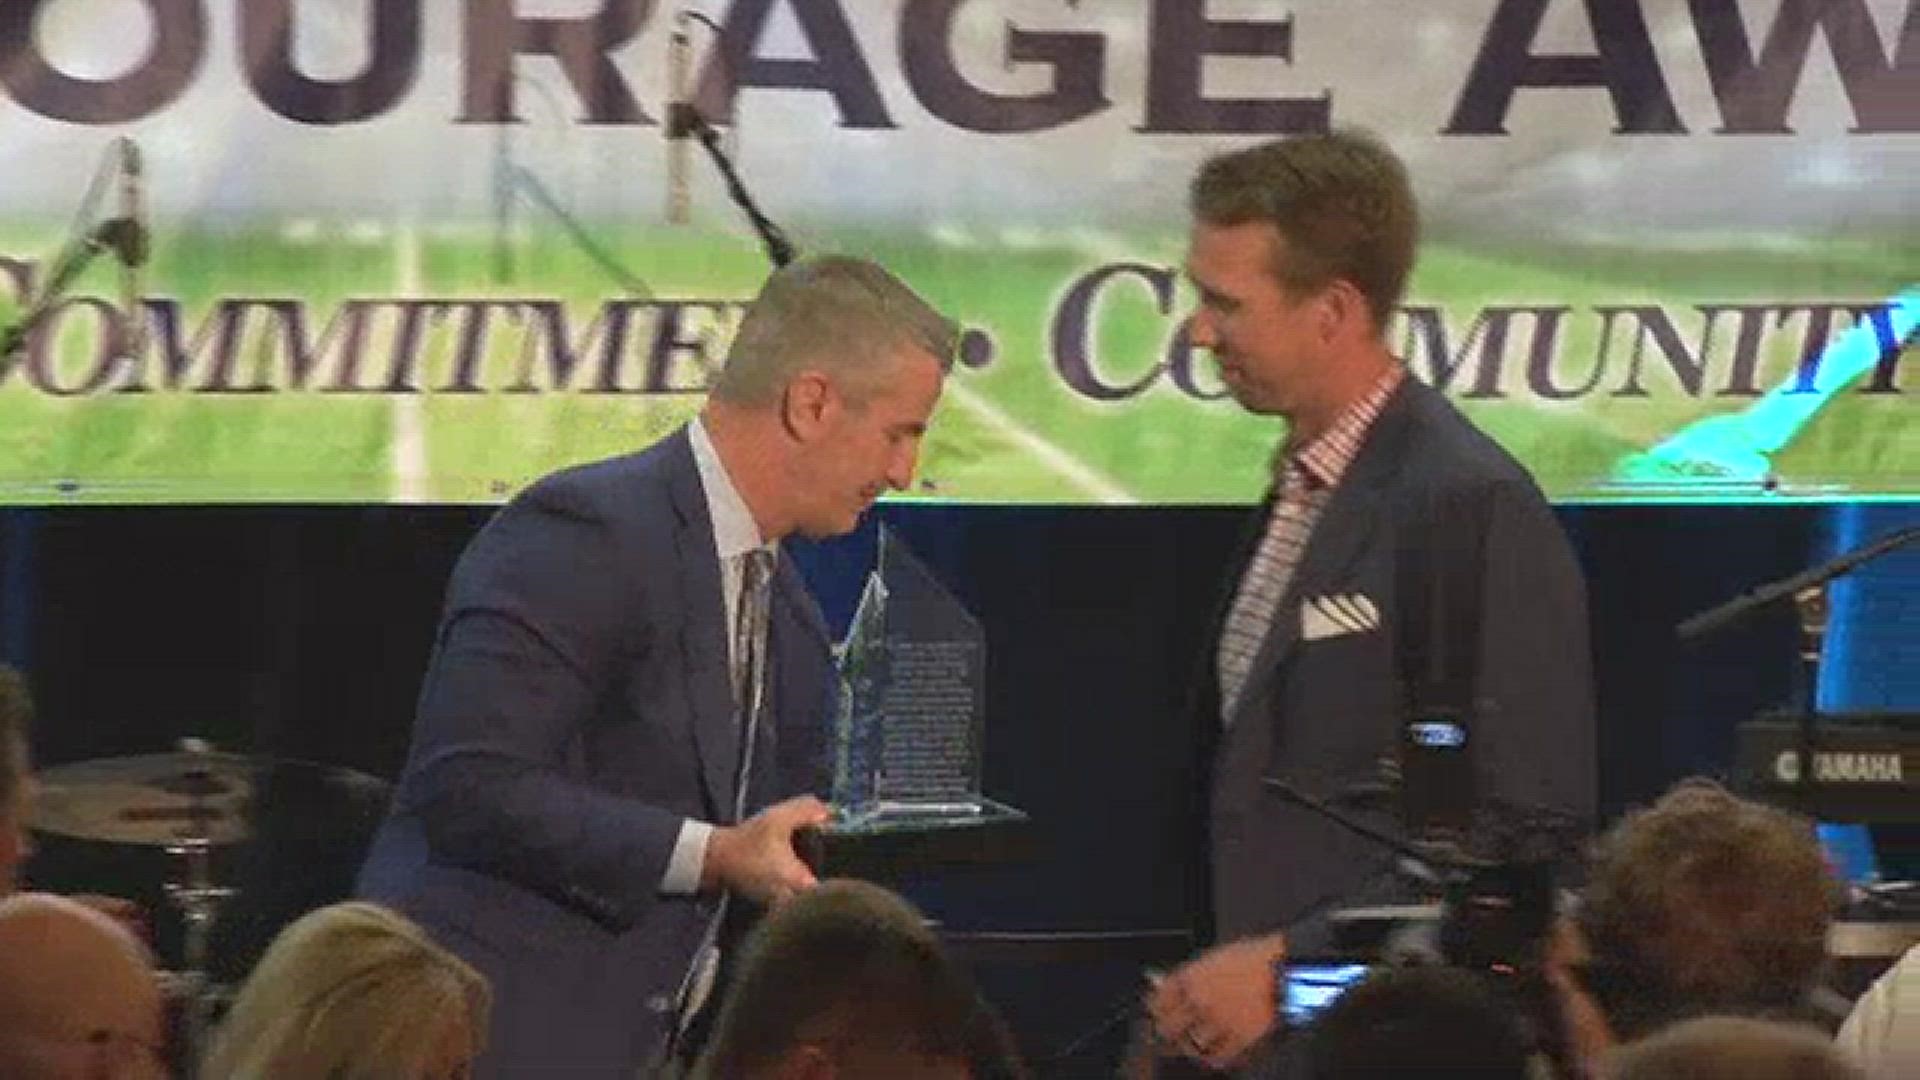 Frank Reich returns to Buffalo for the 19th Call to Courage award